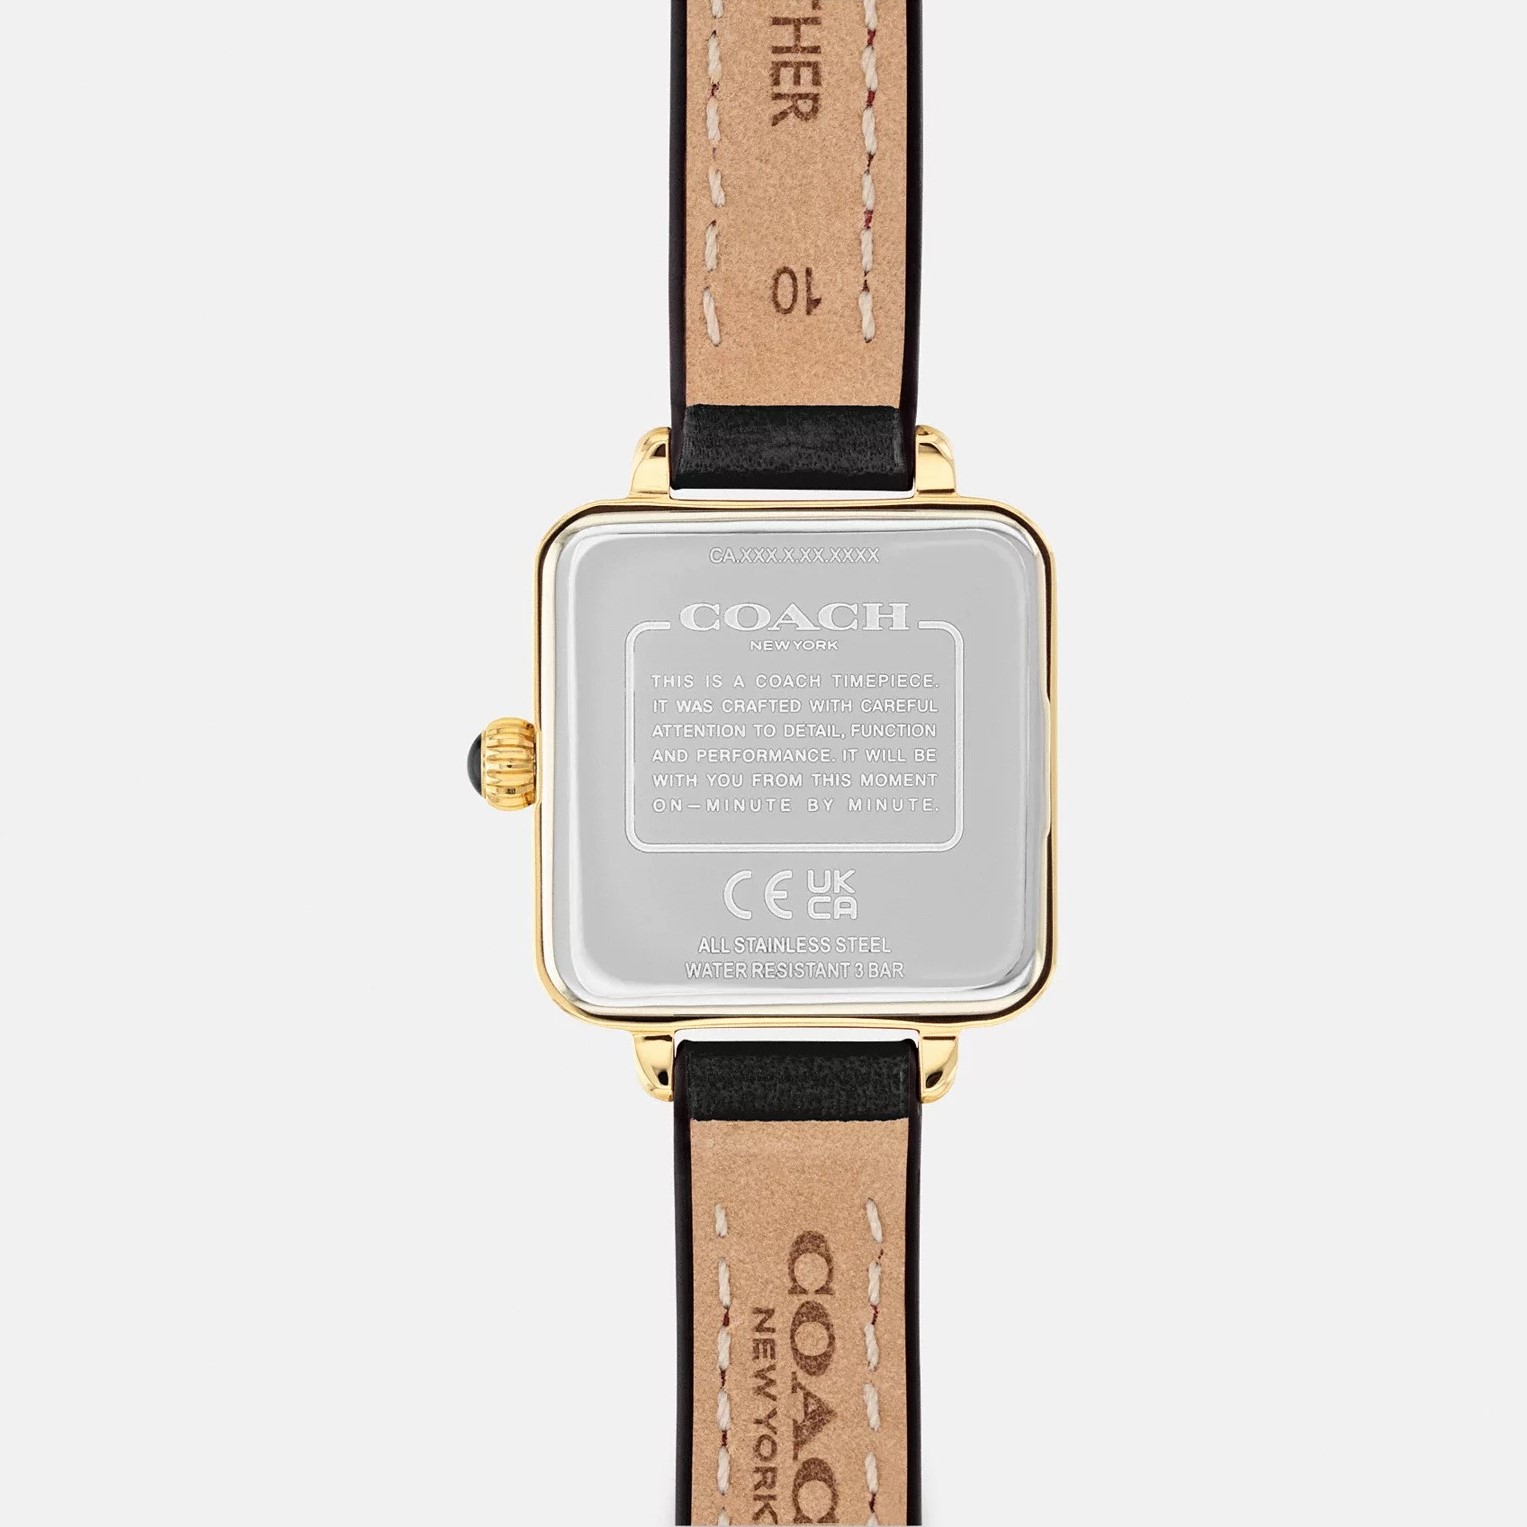 ĐỒNG HỒ NỮ COACH CASS SIGNATURE HORSE AND CARRIAGE ION-PLATED GOLDTONE STEEL AND BLACK LEATHER STRAP WATCH 14504225 6